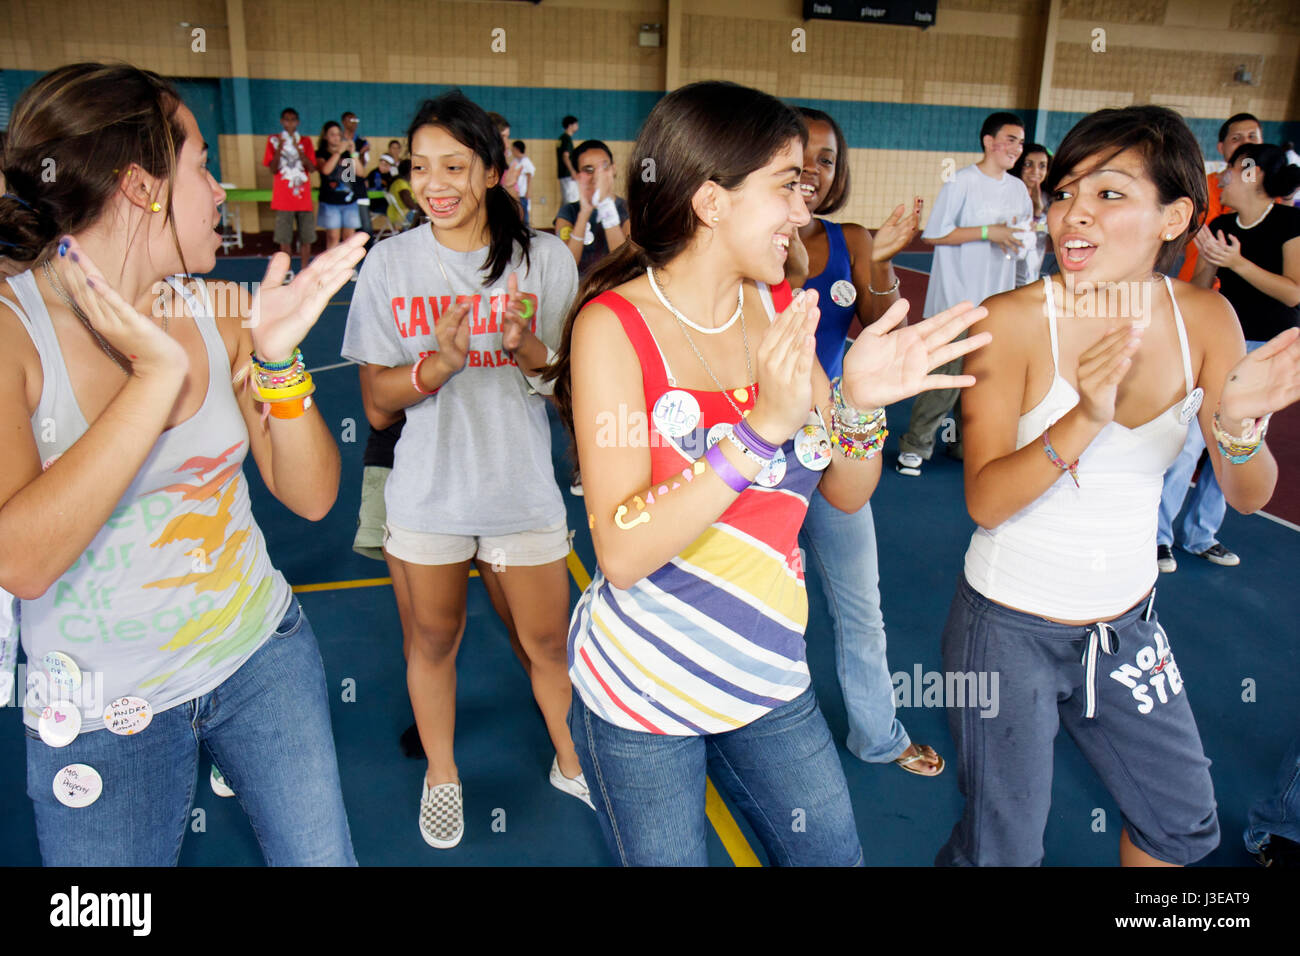 Miami Florida,Homestead,drug free youth club group party,Hispanic girls female,teen teens teenagers students line dance dancing smiling friends Stock Photo